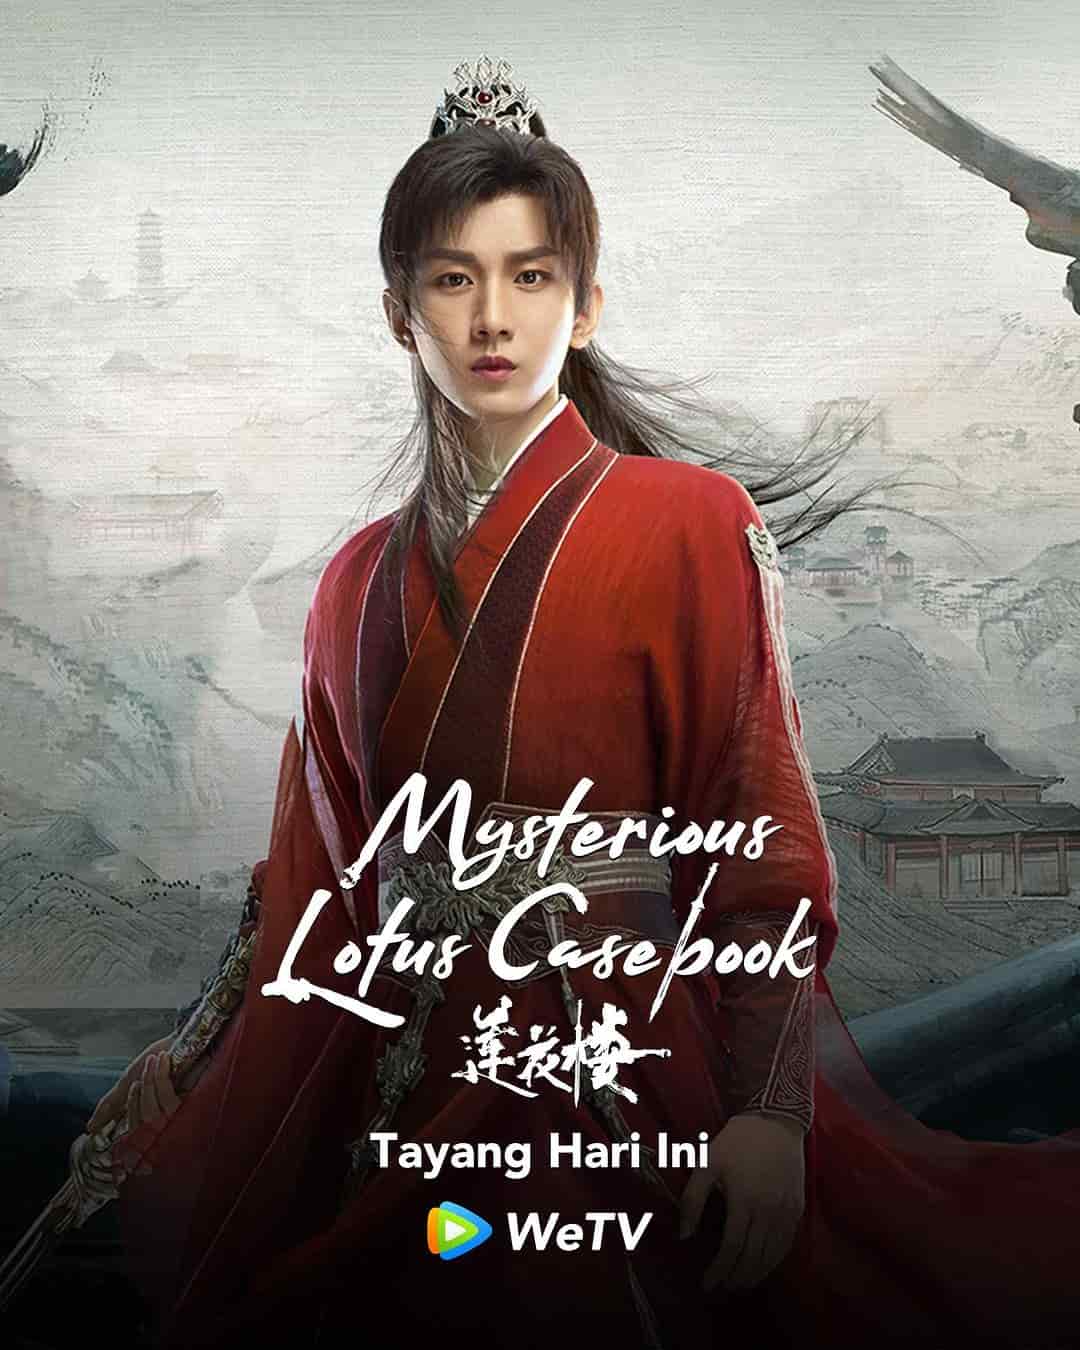 Mysterious Lotus Casebook - Sinopsis, Pemain, OST, Episode, Review